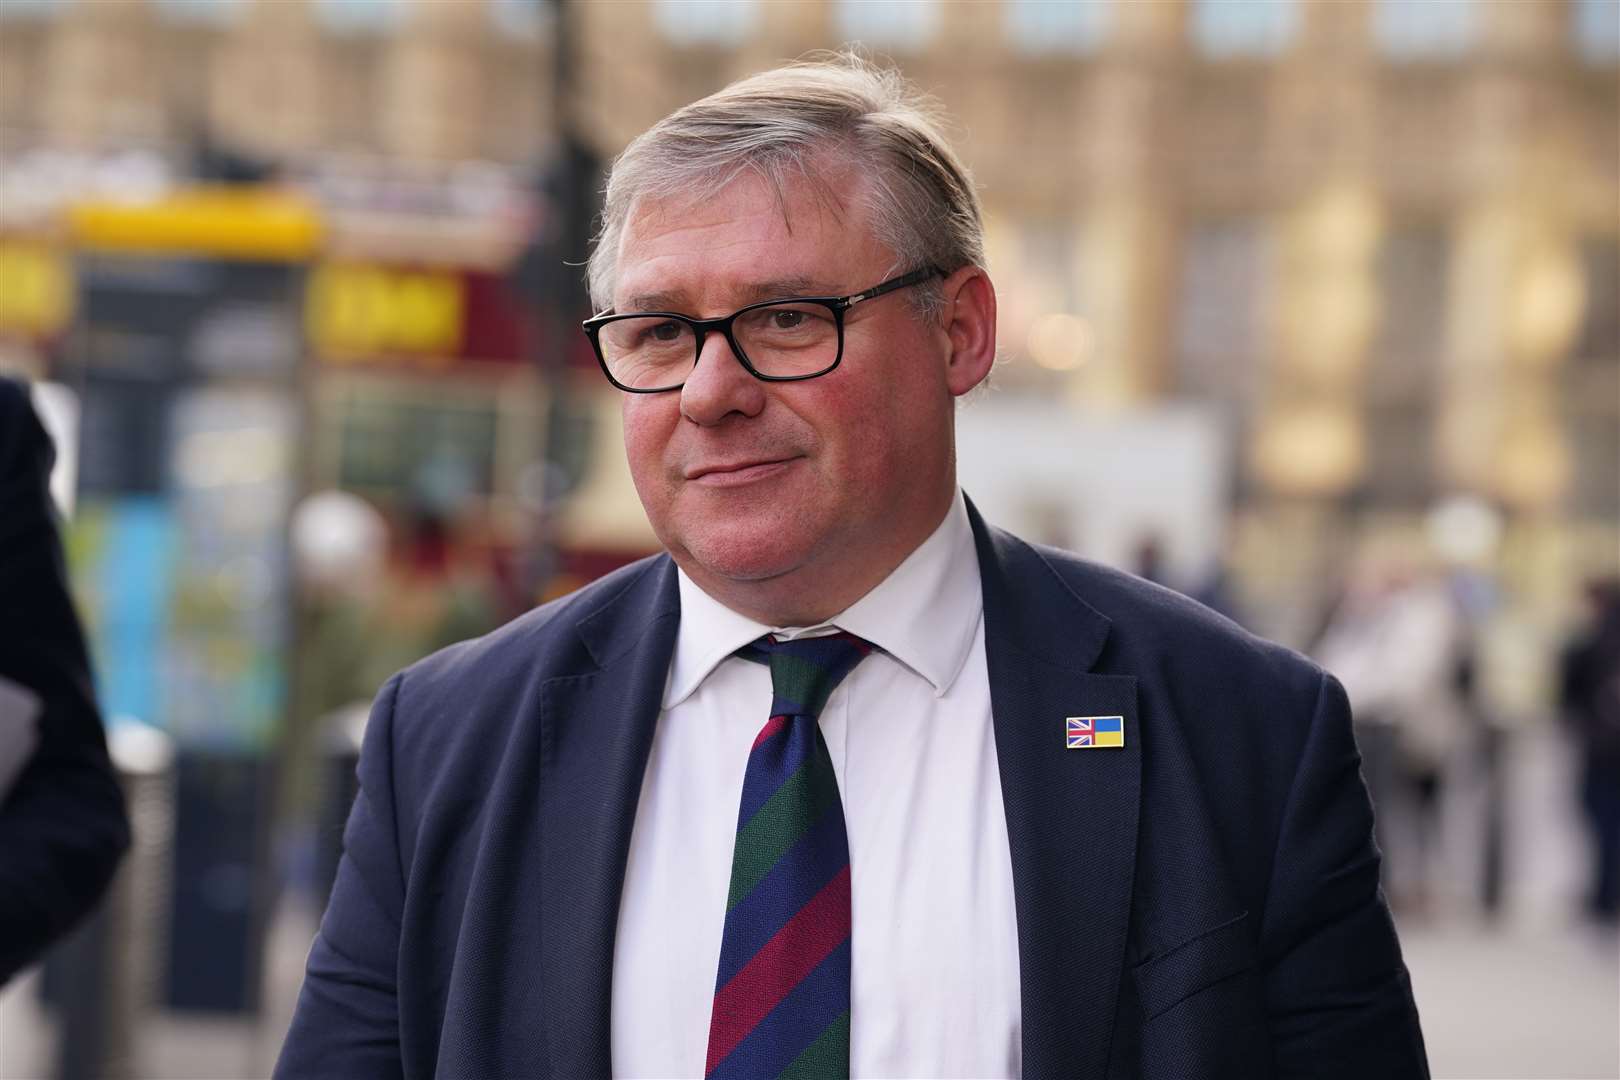 European Research Group chair Mark Francois said the five right-wing factions of Tory MPs could not support the Rwanda Bill as drafted (Lucy North/PA)